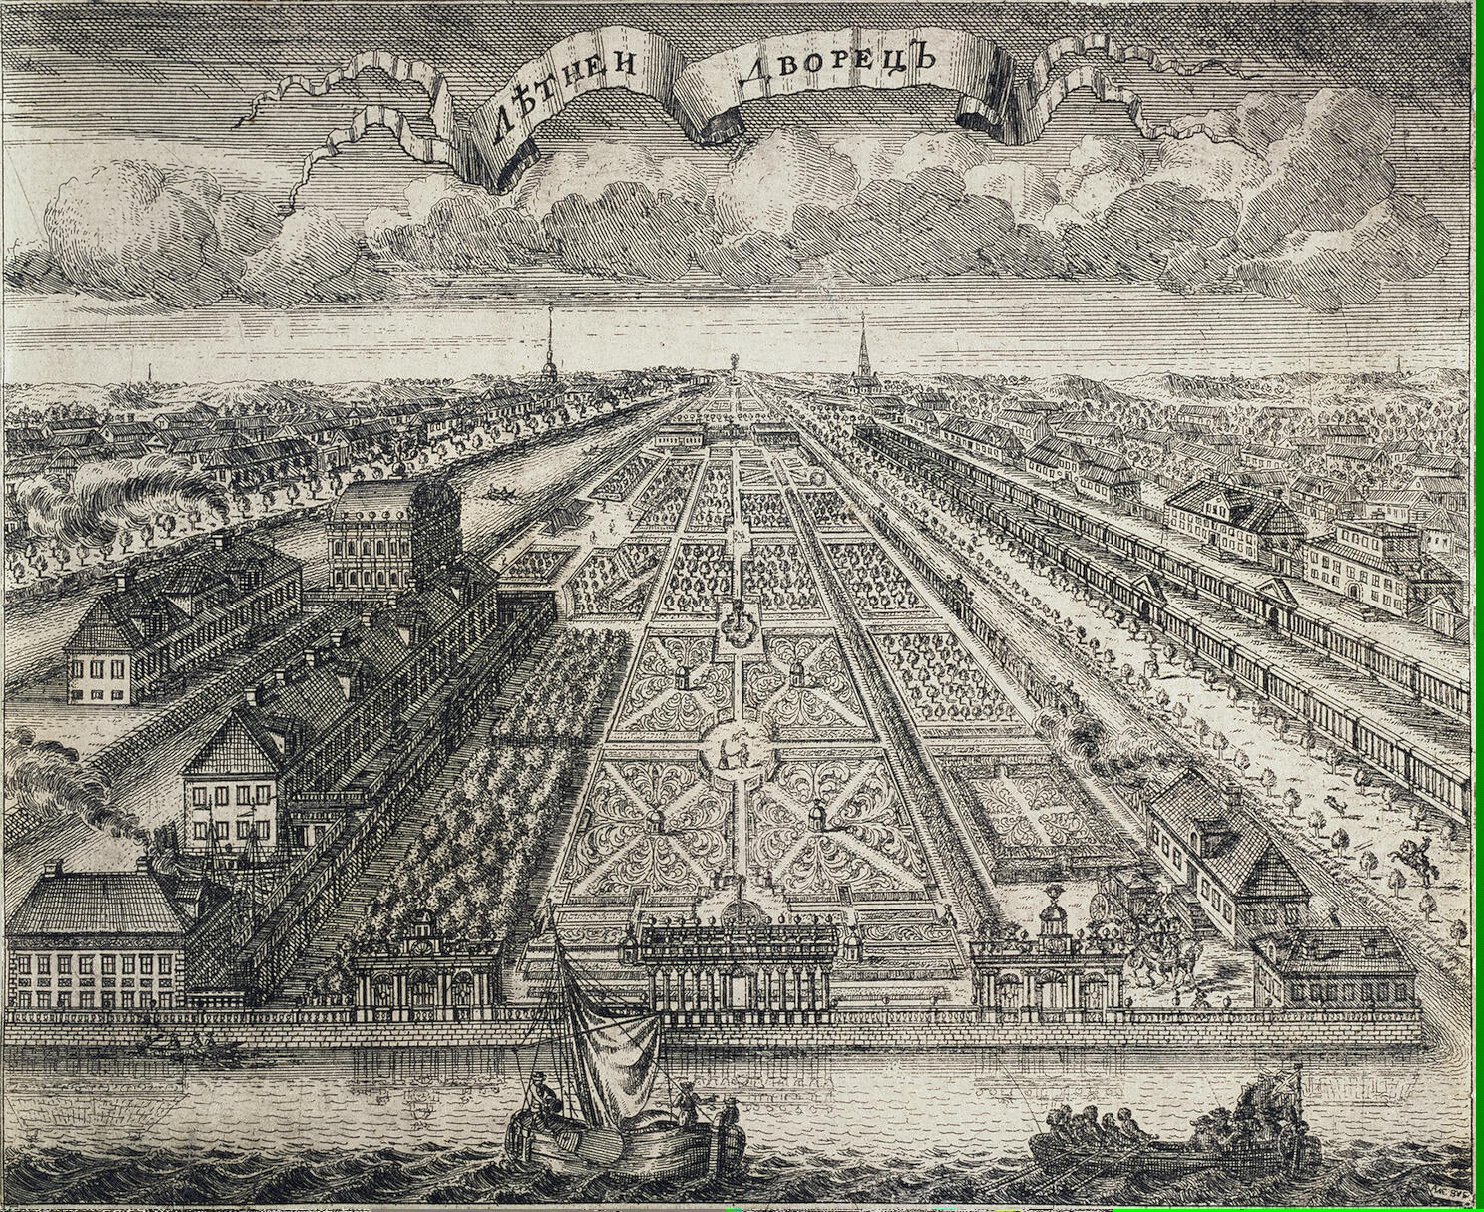 Aleksei Zubov, "Summer Palace and Garden," 1717, etching and engraving, 16.5 x 20.4 cm